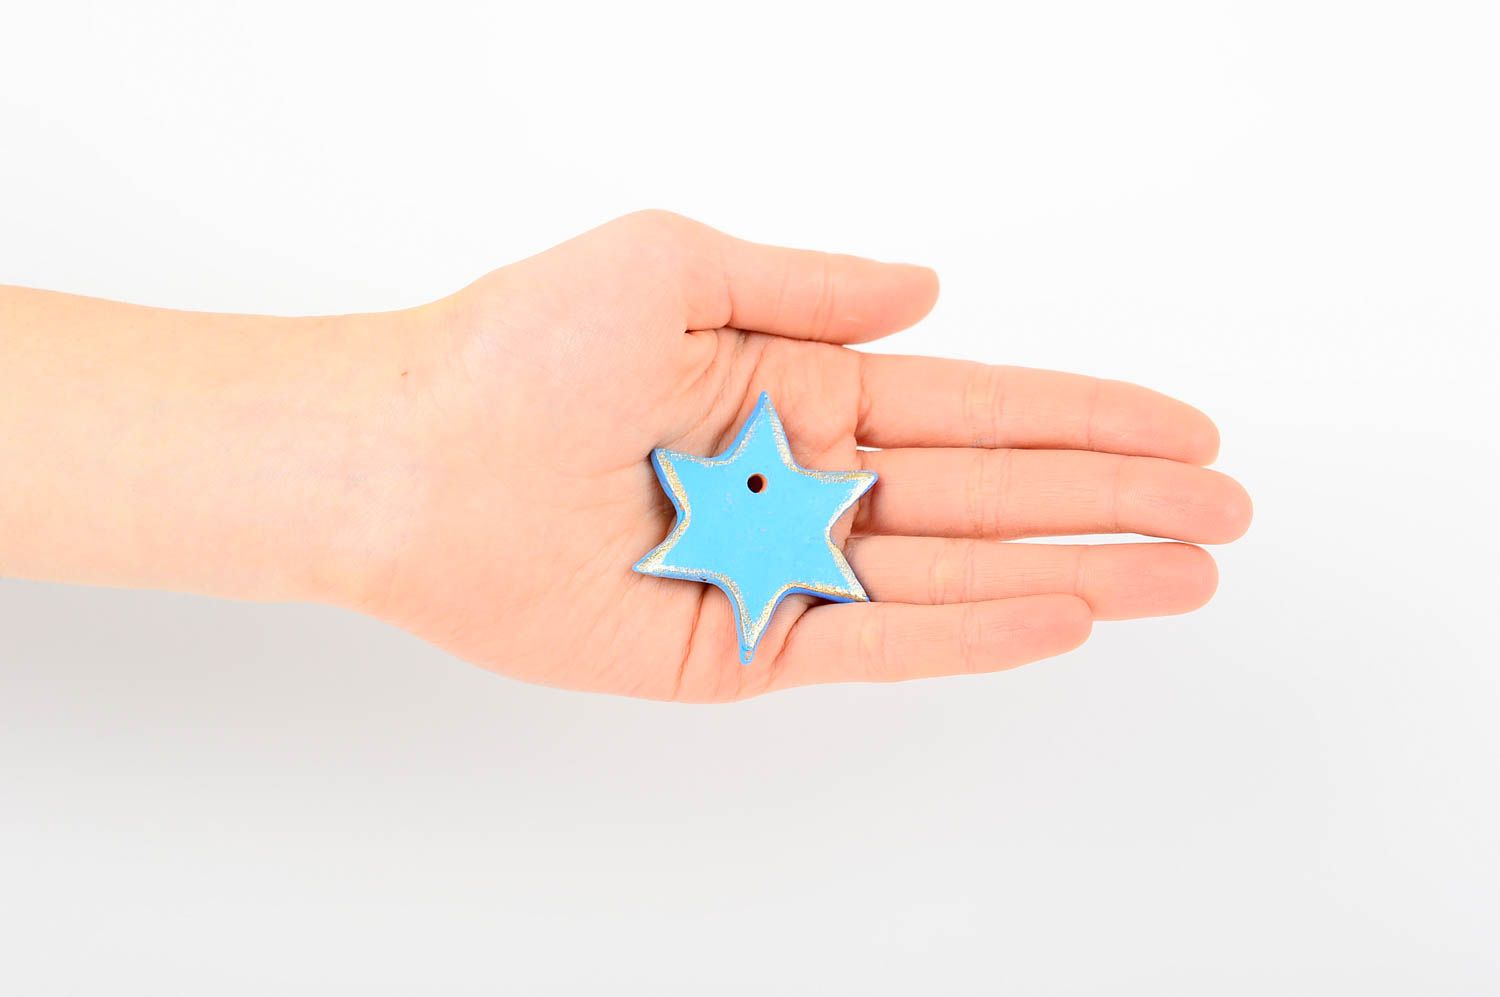 Handmade Christmas tree toy home decor ideas blue star clay toy New Years gift  photo 2